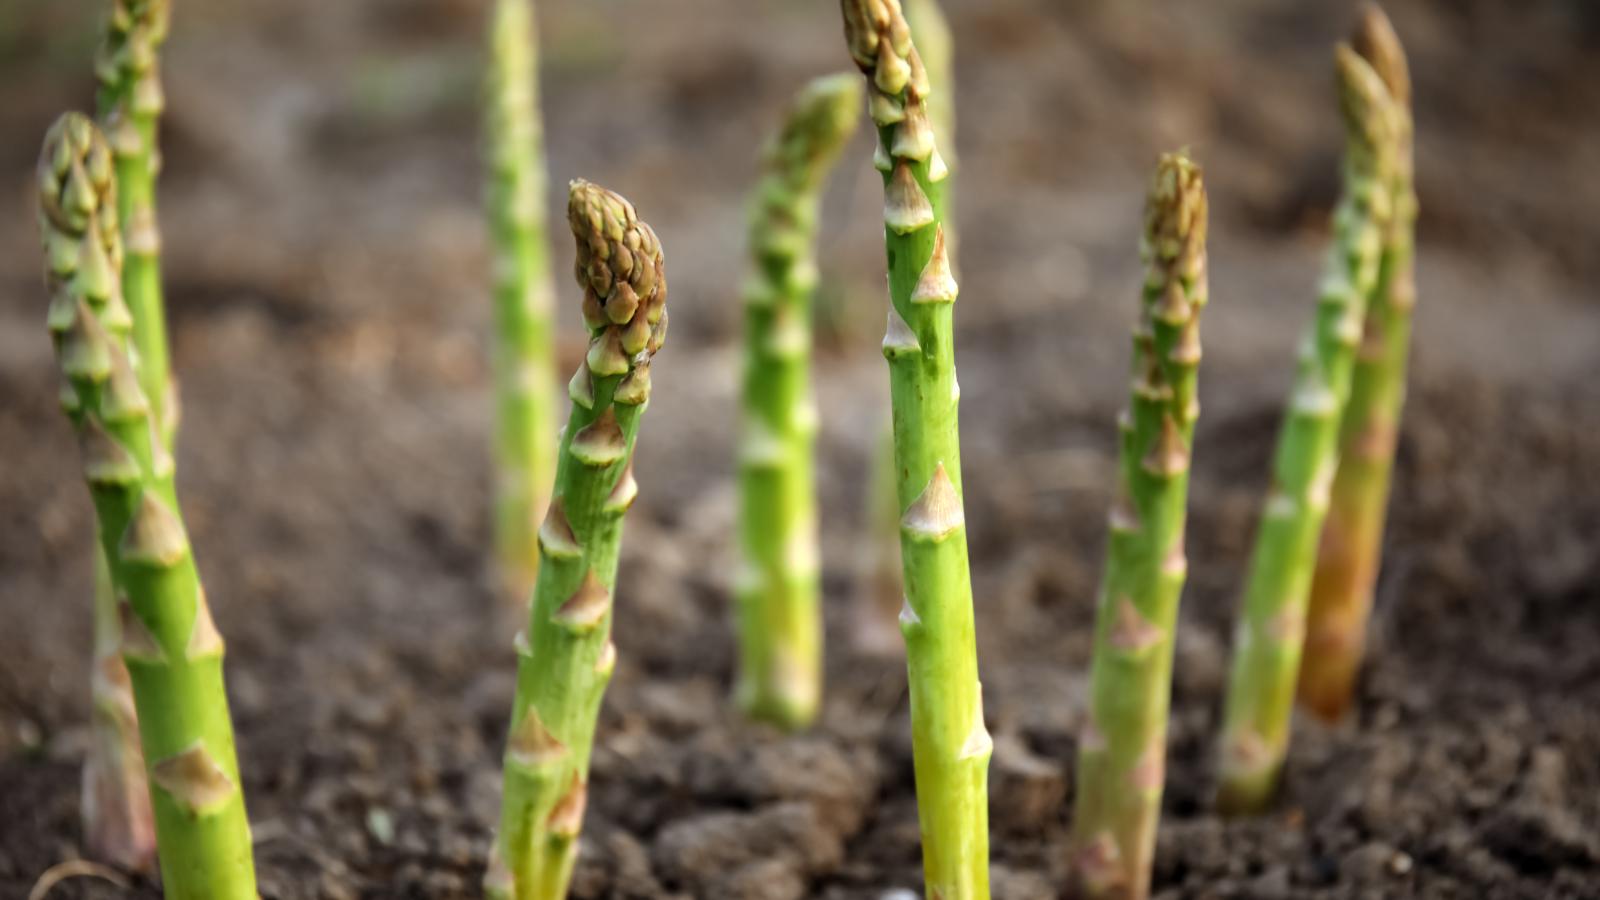 Asparagus spears growing in home garden.